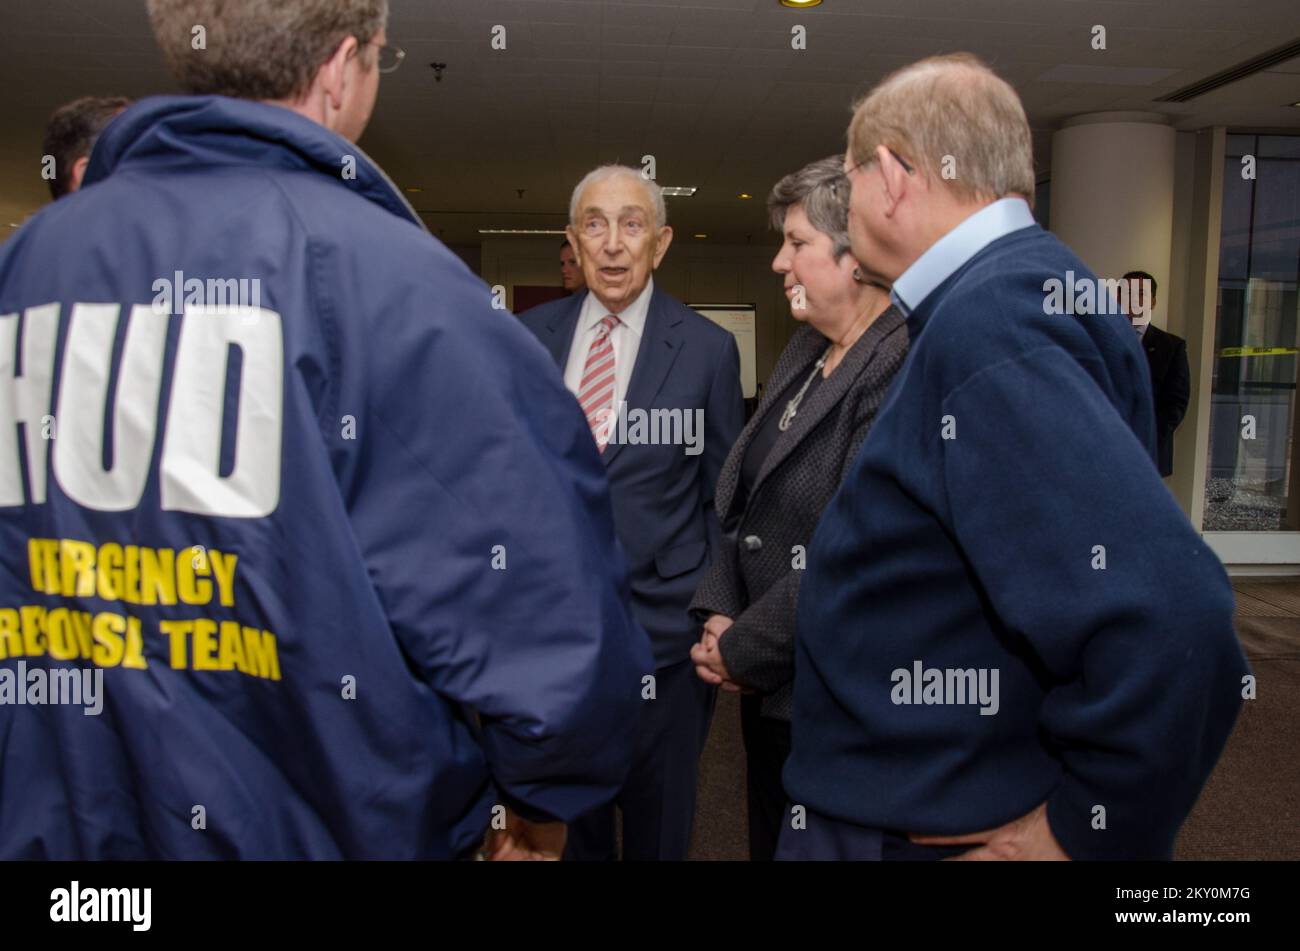 VIP Visit. New Jersey Hurricane Sandy. Photographs Relating to Disasters and Emergency Management Programs, Activities, and Officials Stock Photo